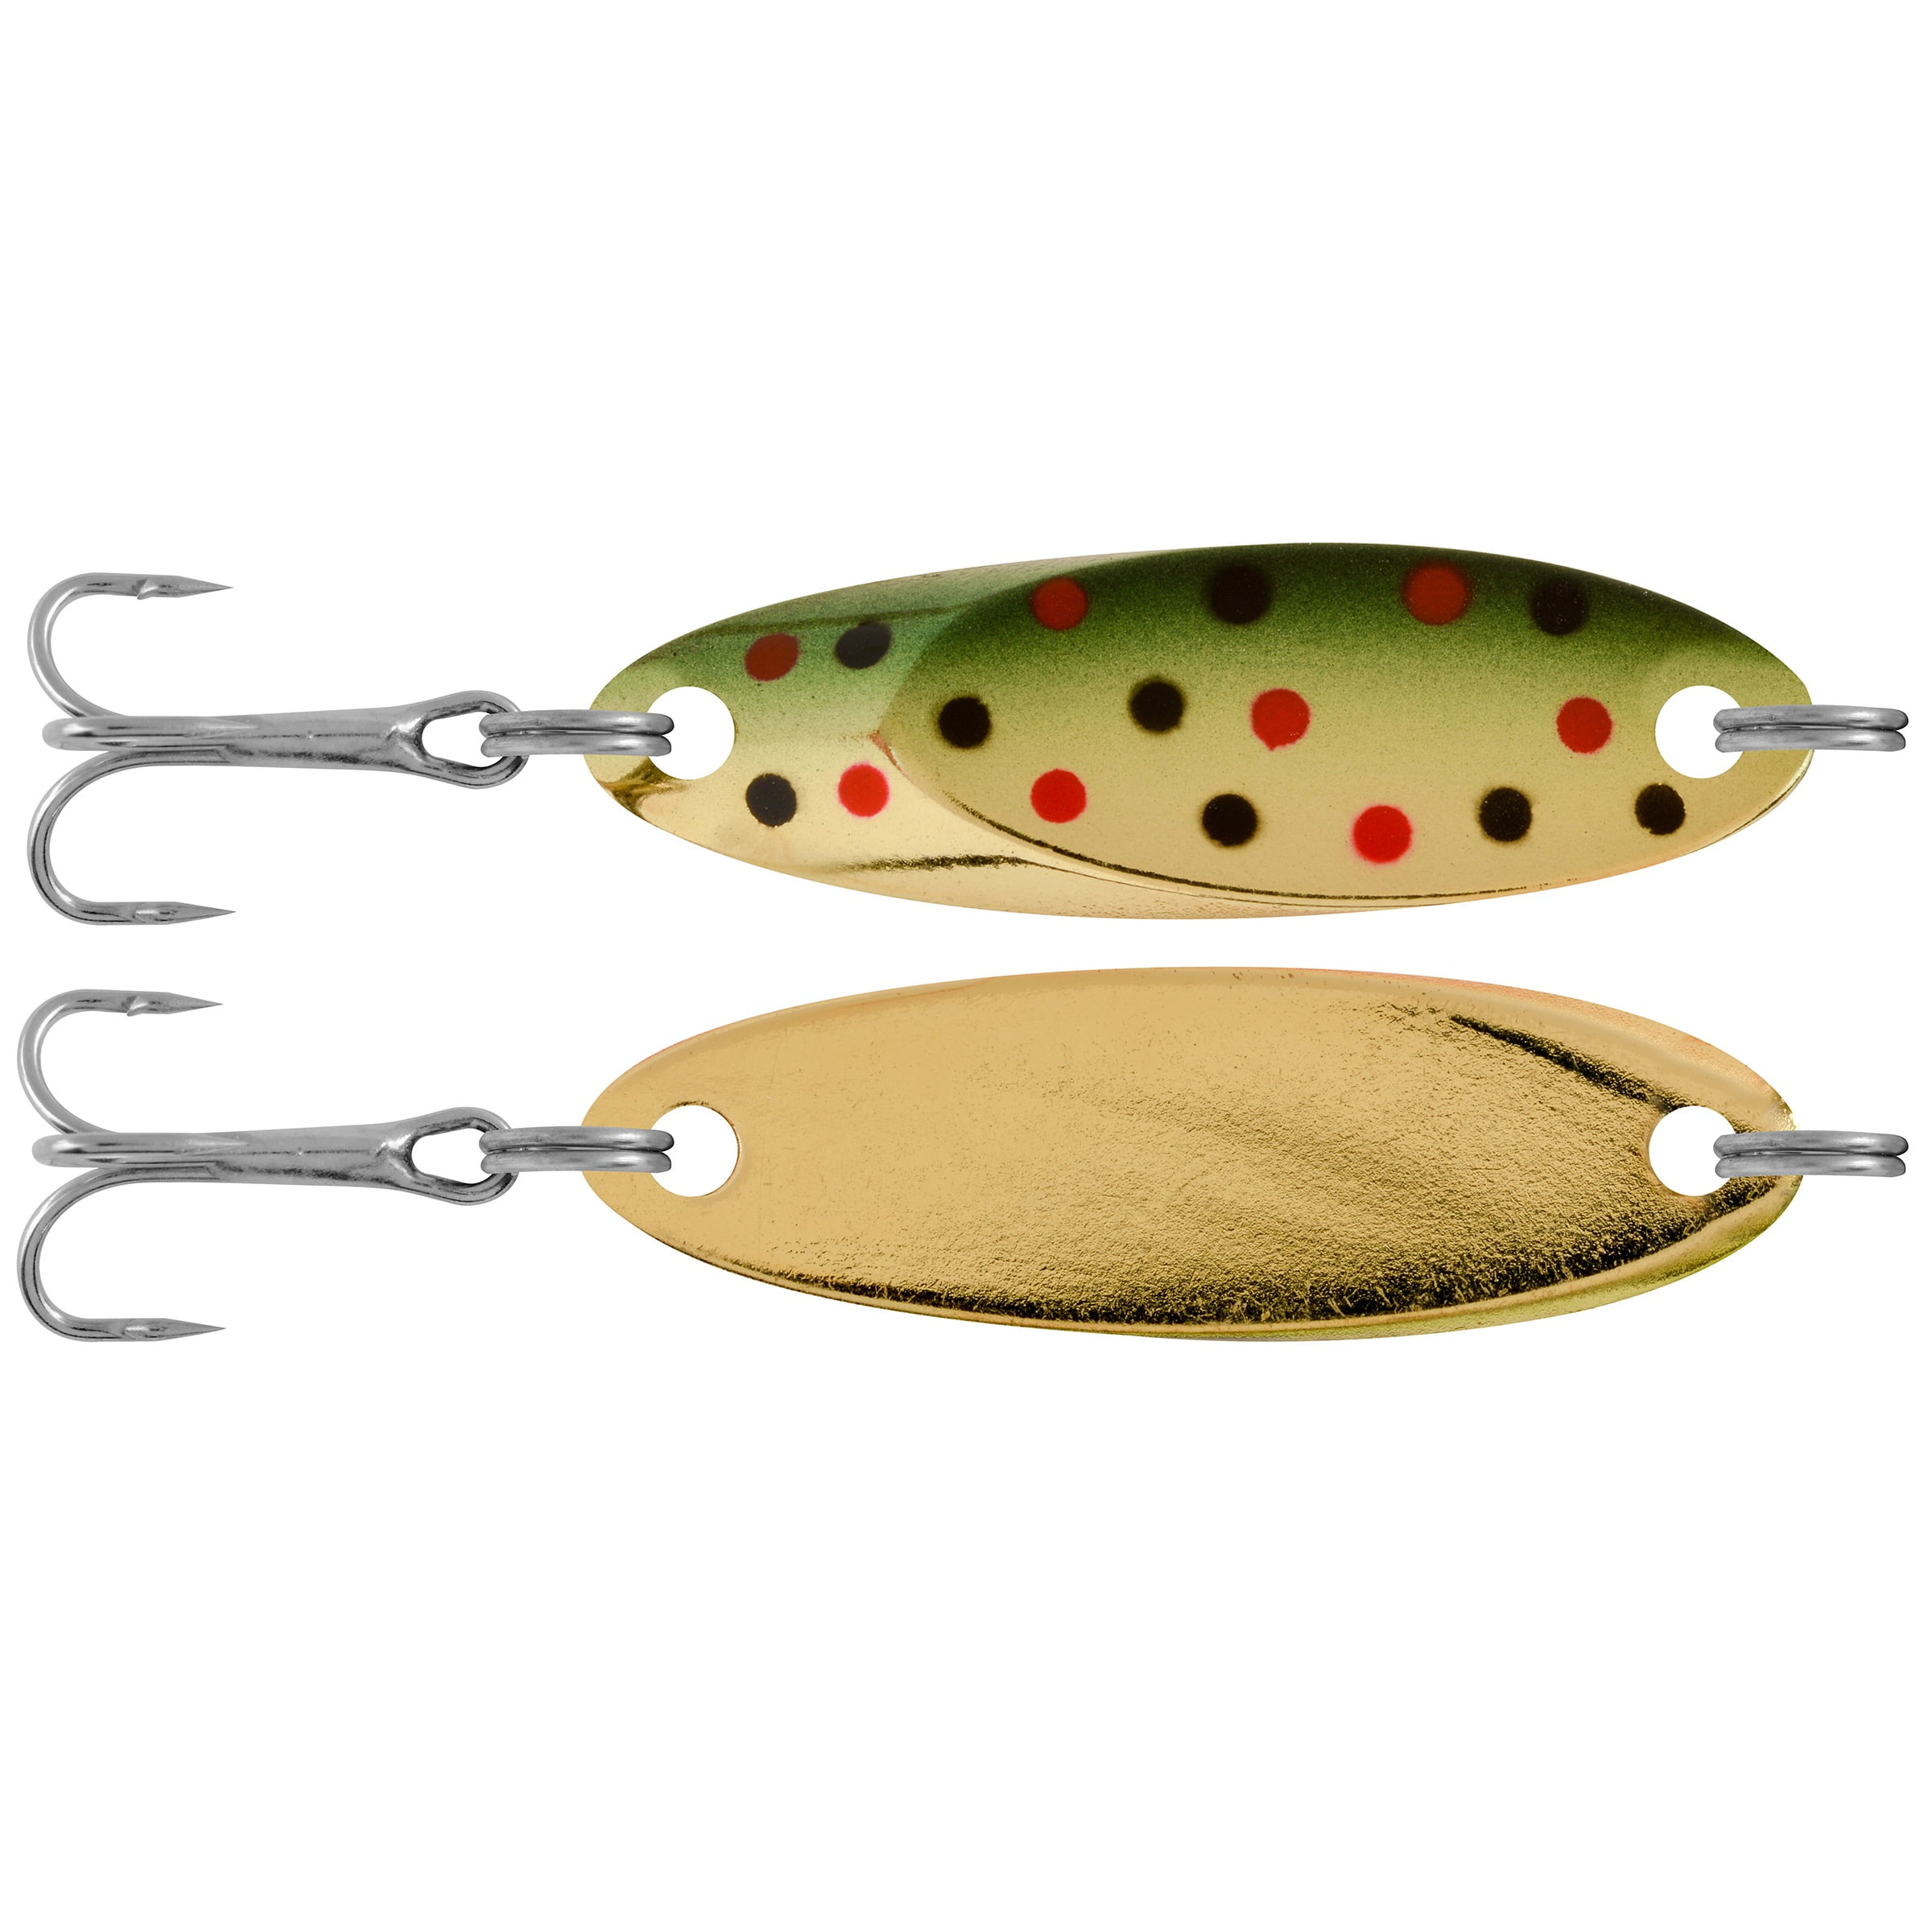 South Bend Kast-A-Way Shud-L-Spoon Freshwater Fishing Lure, Brook